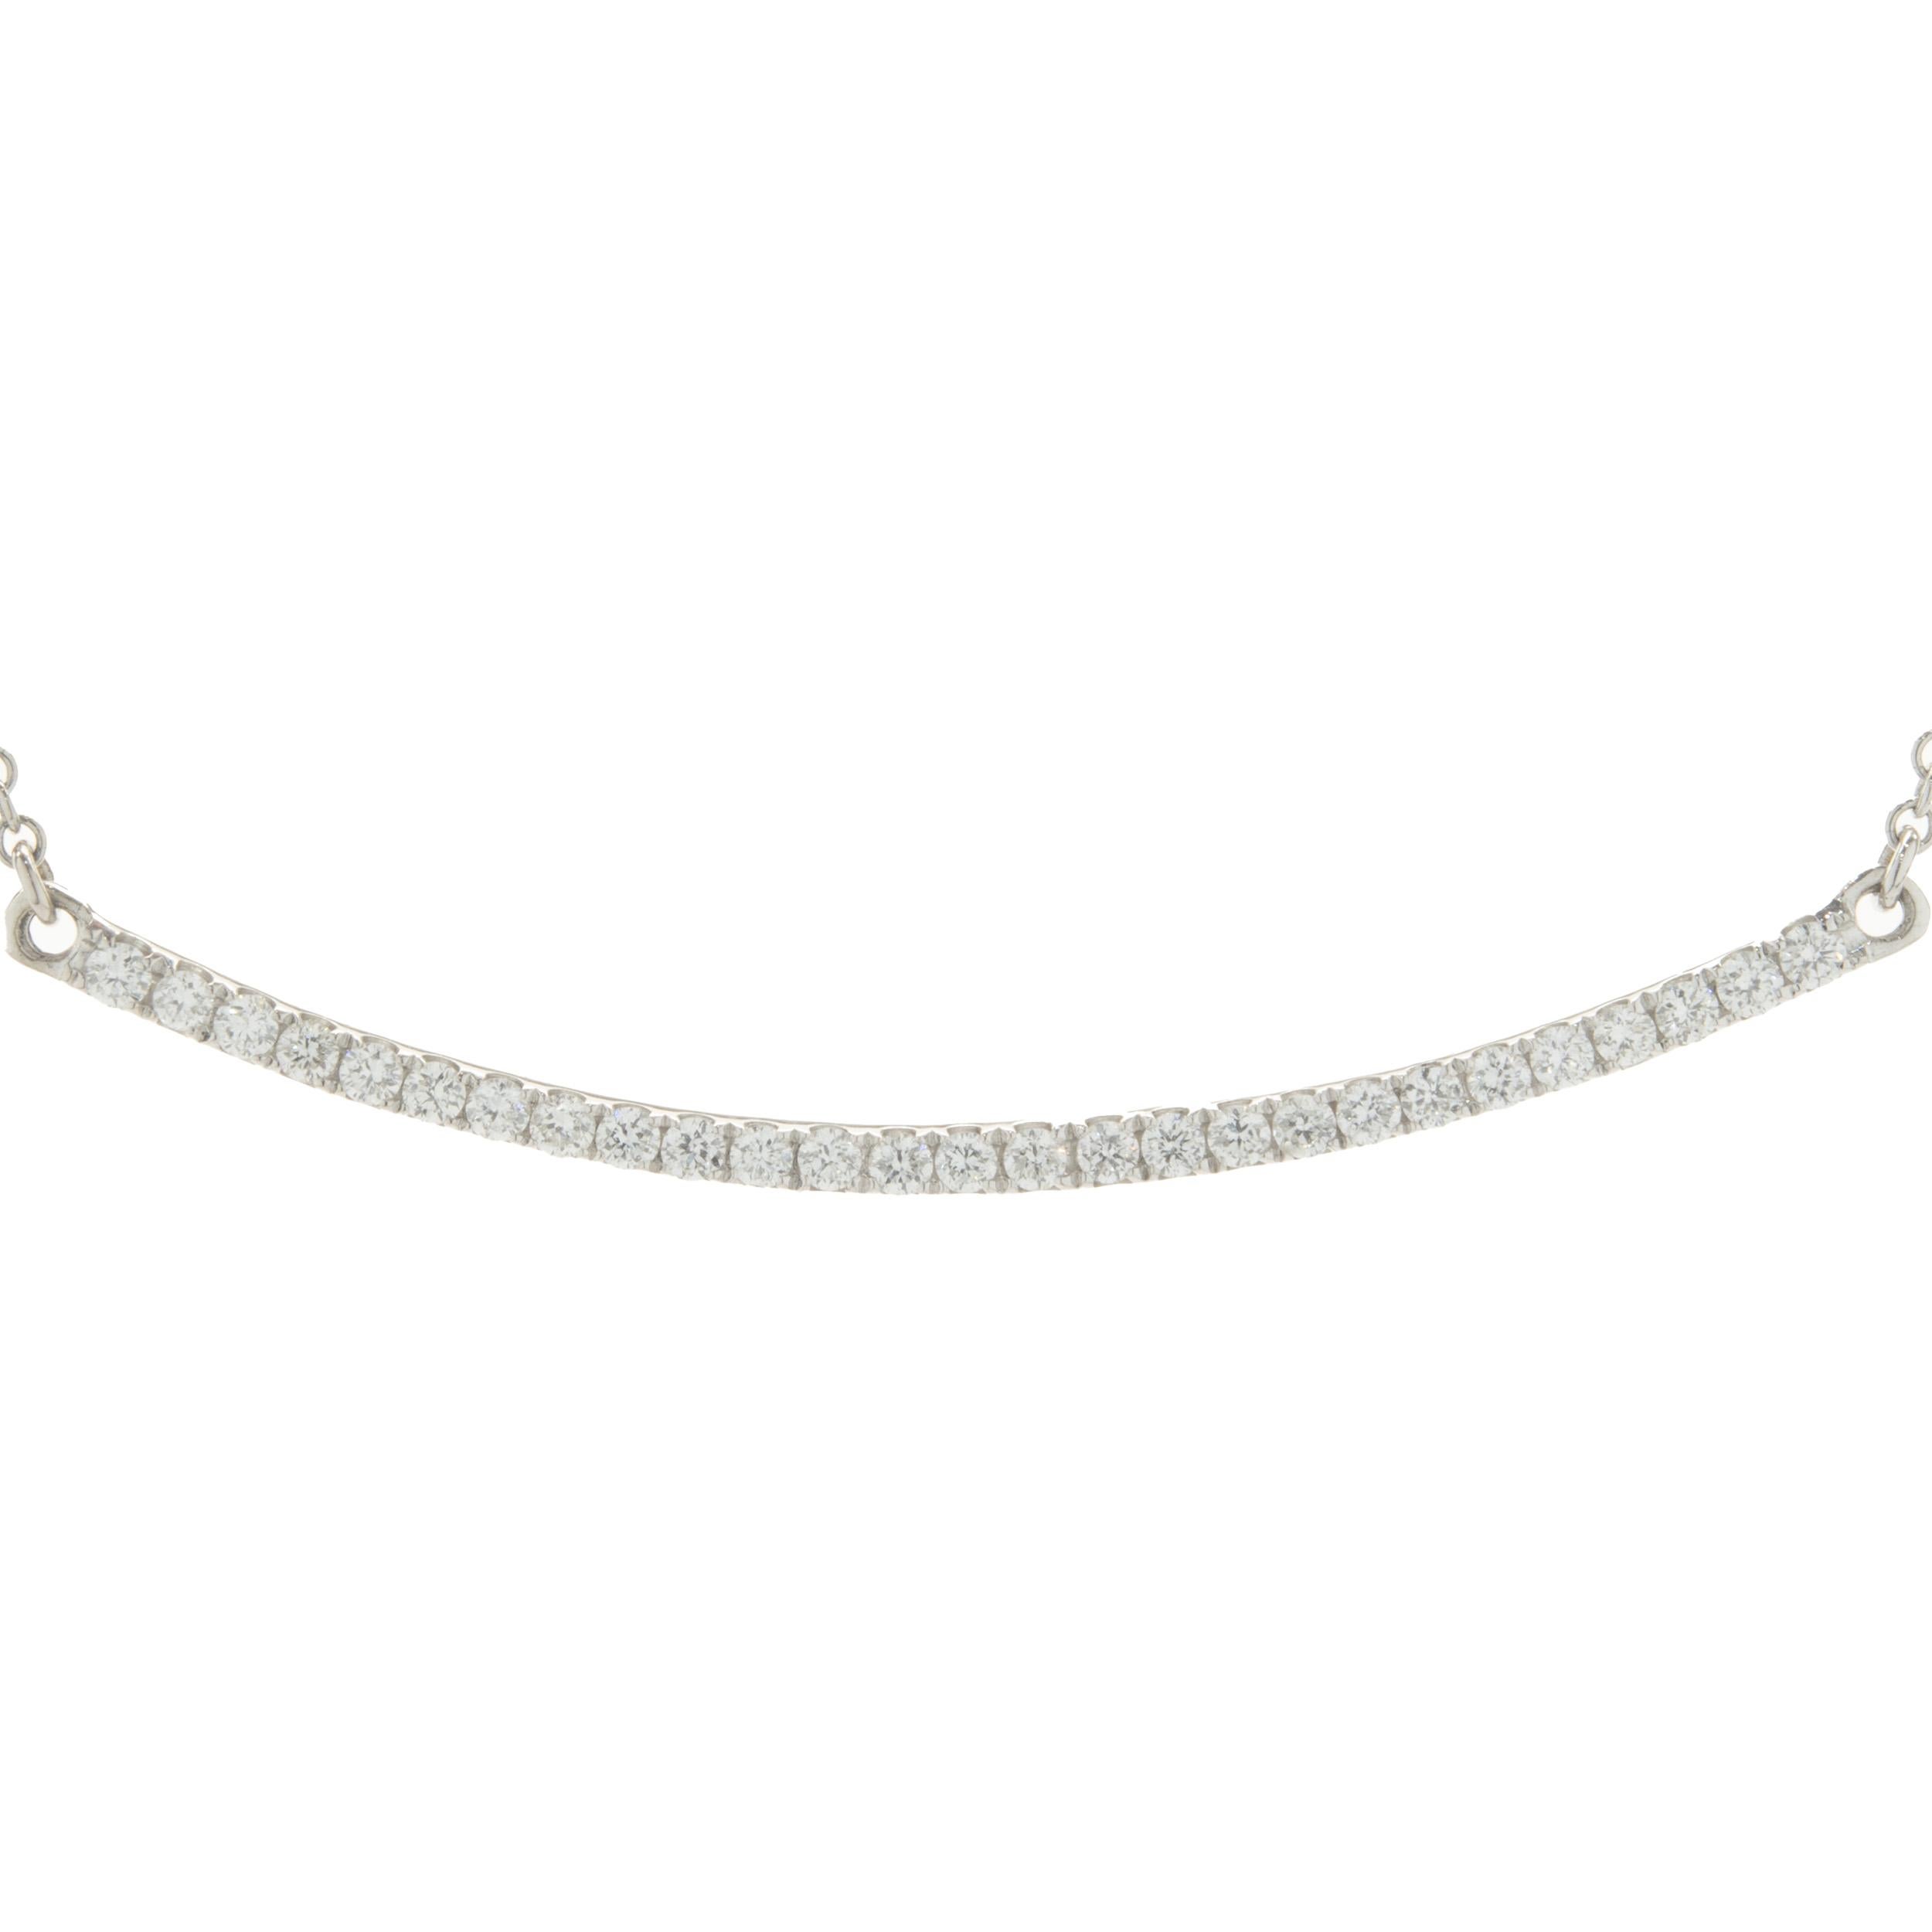 Designer: custom design
Material: 18K white gold
Diamond: round brilliant cut = 0.22cttw
Color: G
Clarity: VS2
Dimensions: necklace measures 18-inches in length 
Weight: 2.25 grams